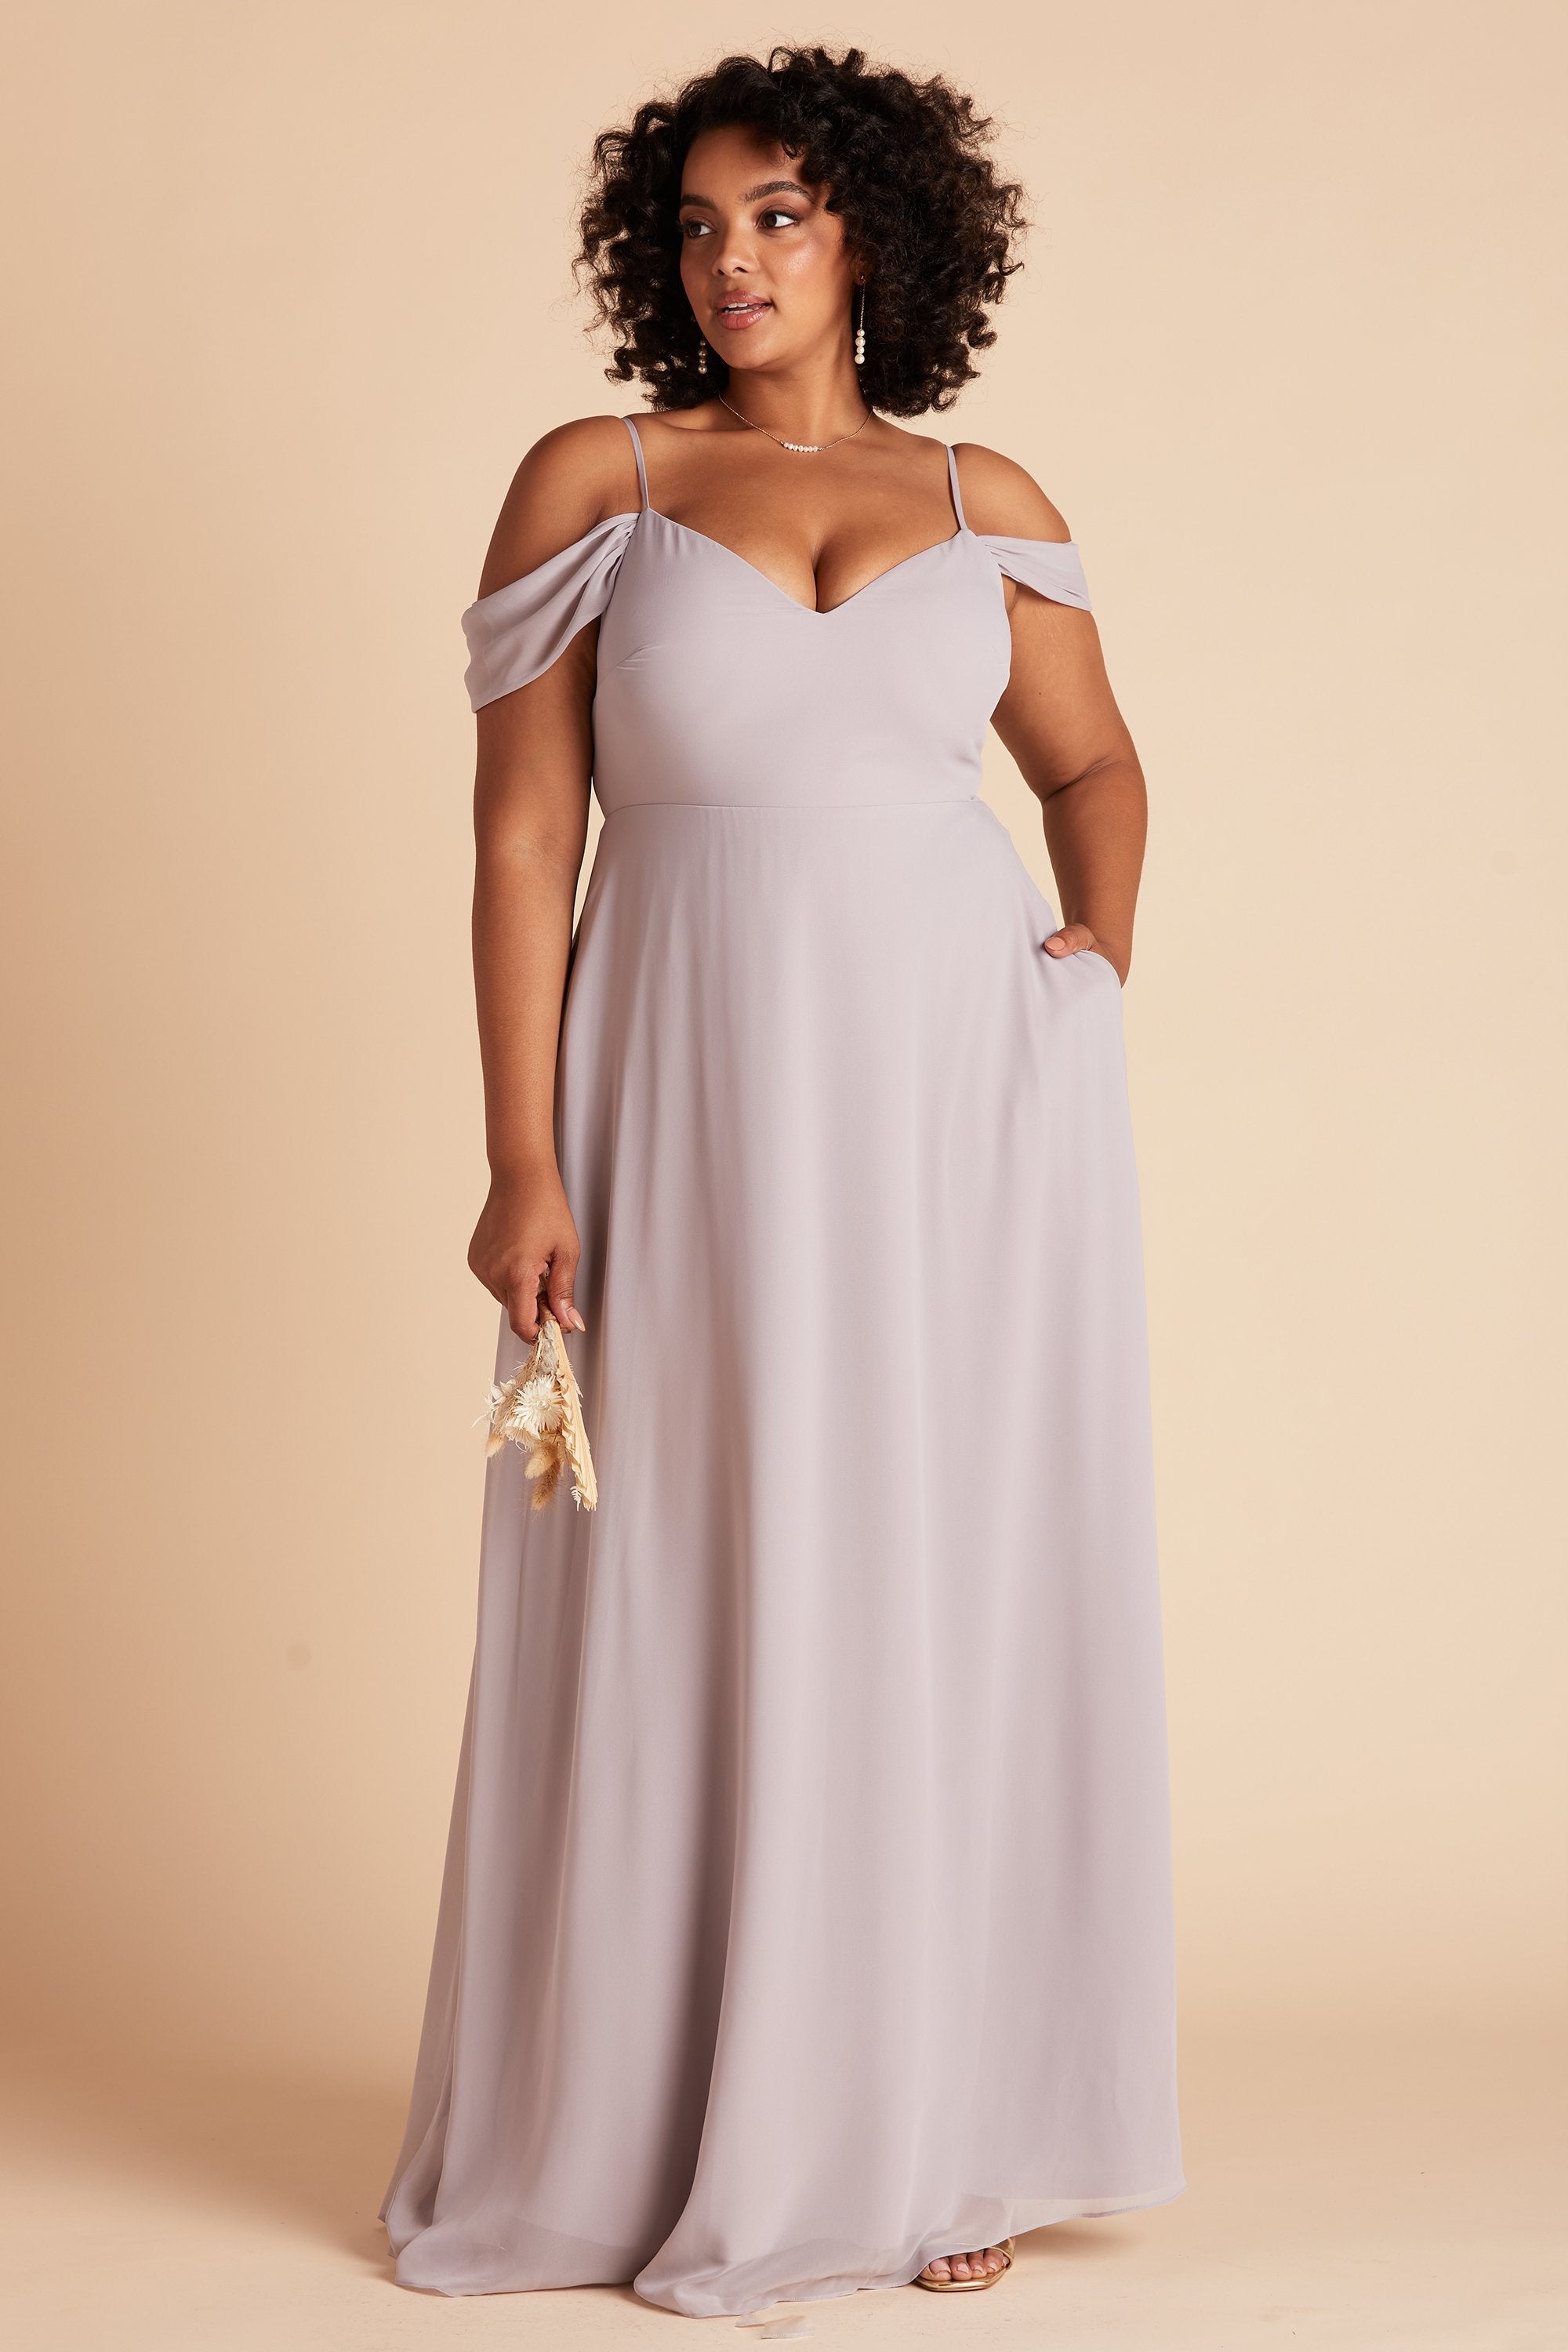 Devin convertible plus size bridesmaids dress in lilac purple chiffon by Birdy Grey, front view with hand in pocket